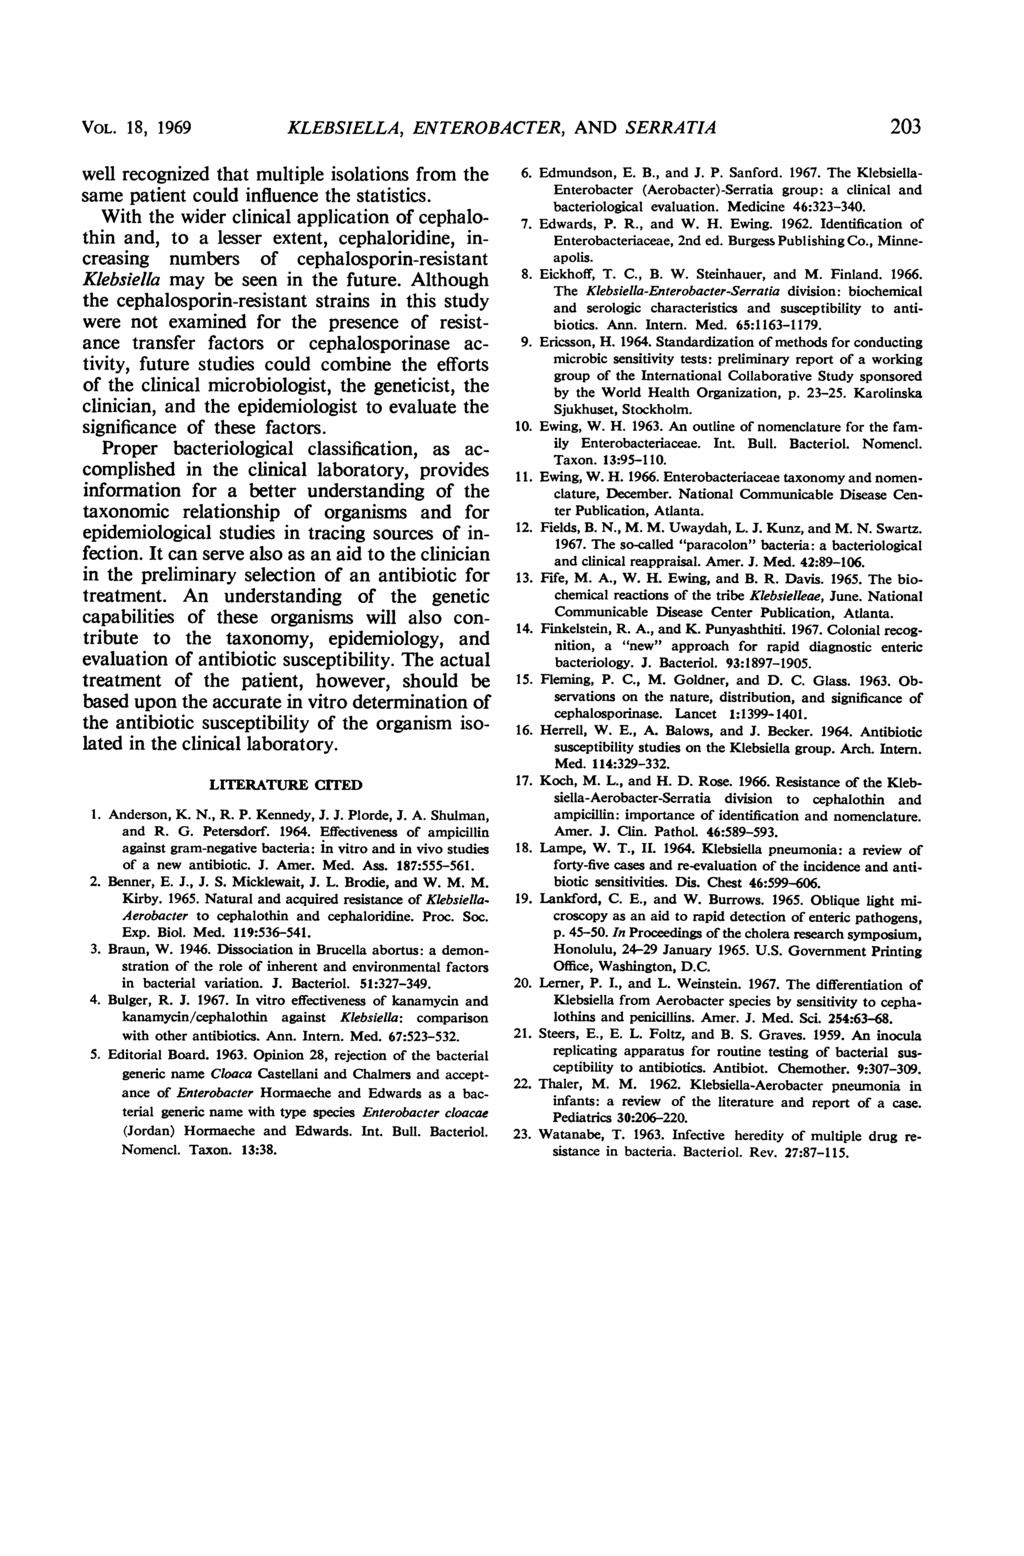 VOL. 18, 1969 KLEBSIELLA, ENTEROBACTER, AND SERRATIA 203 well recognized that multiple isolations from the same patient could influence the statistics.